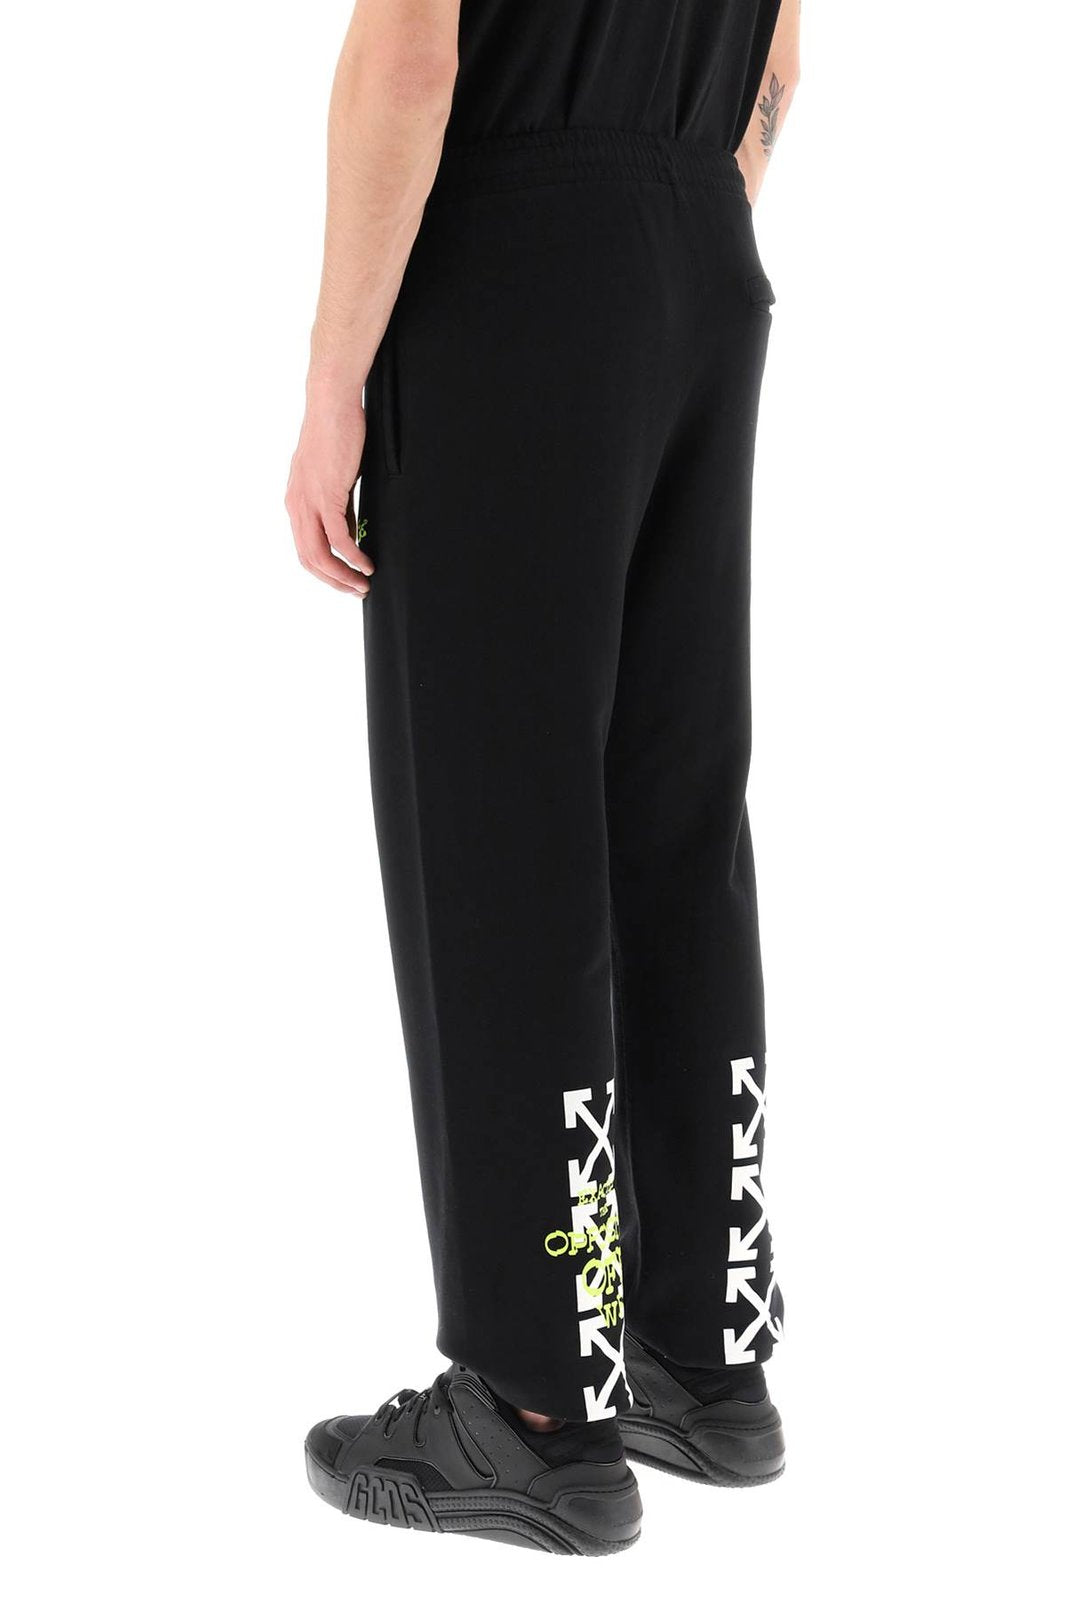 Off-White Arrows Logo Printed Track Pants